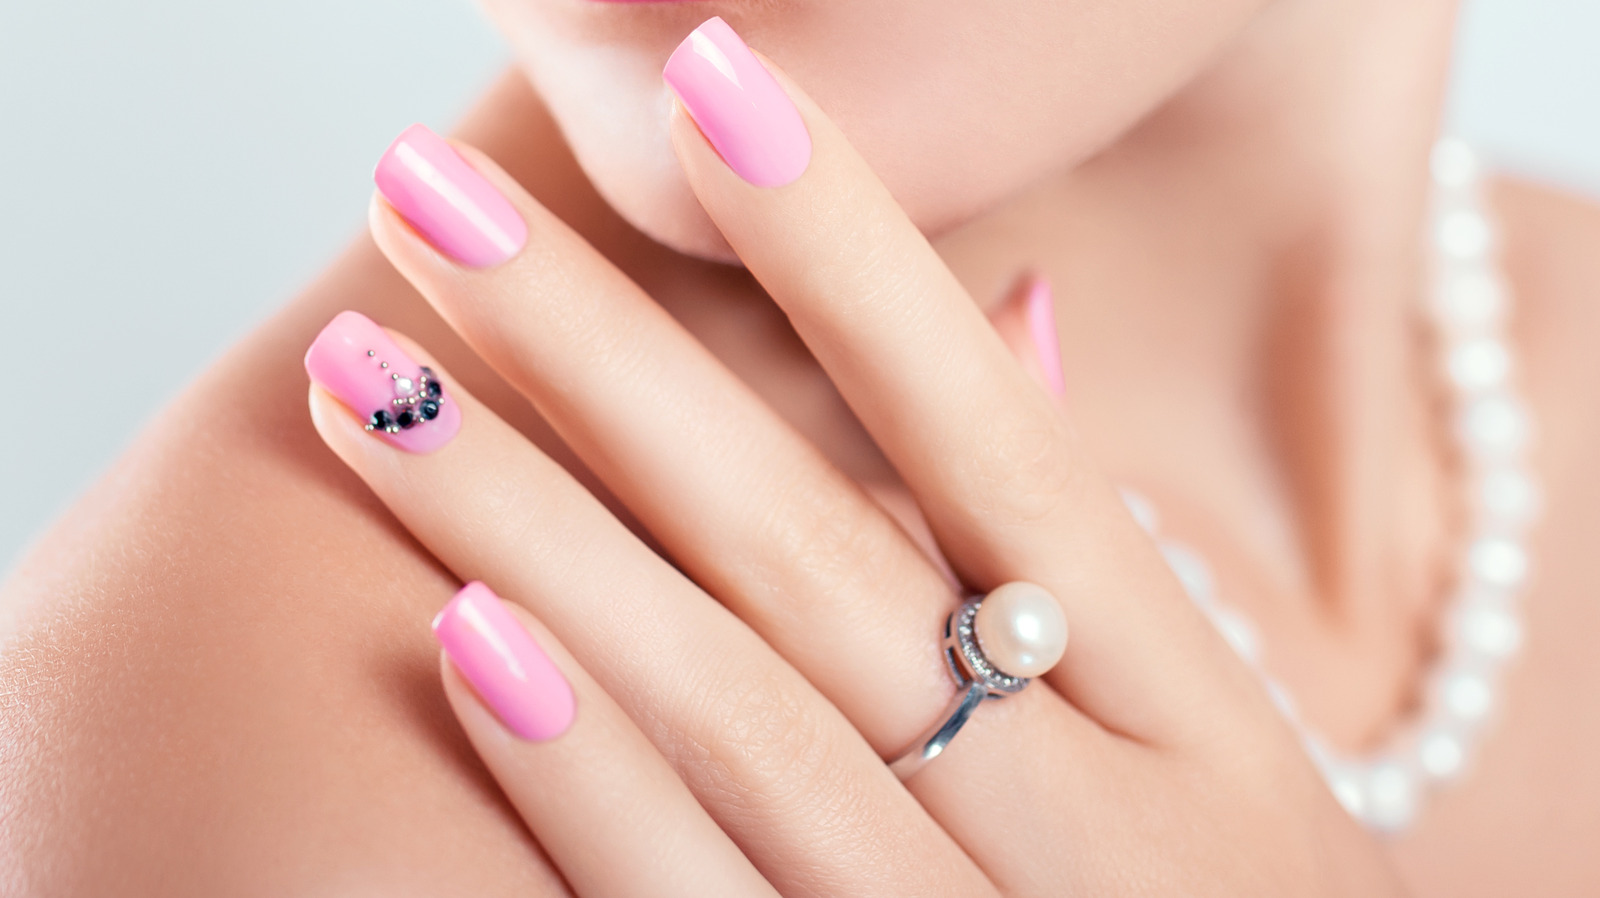 Nail Jewelry Is the New Way to Accent Your Manicure